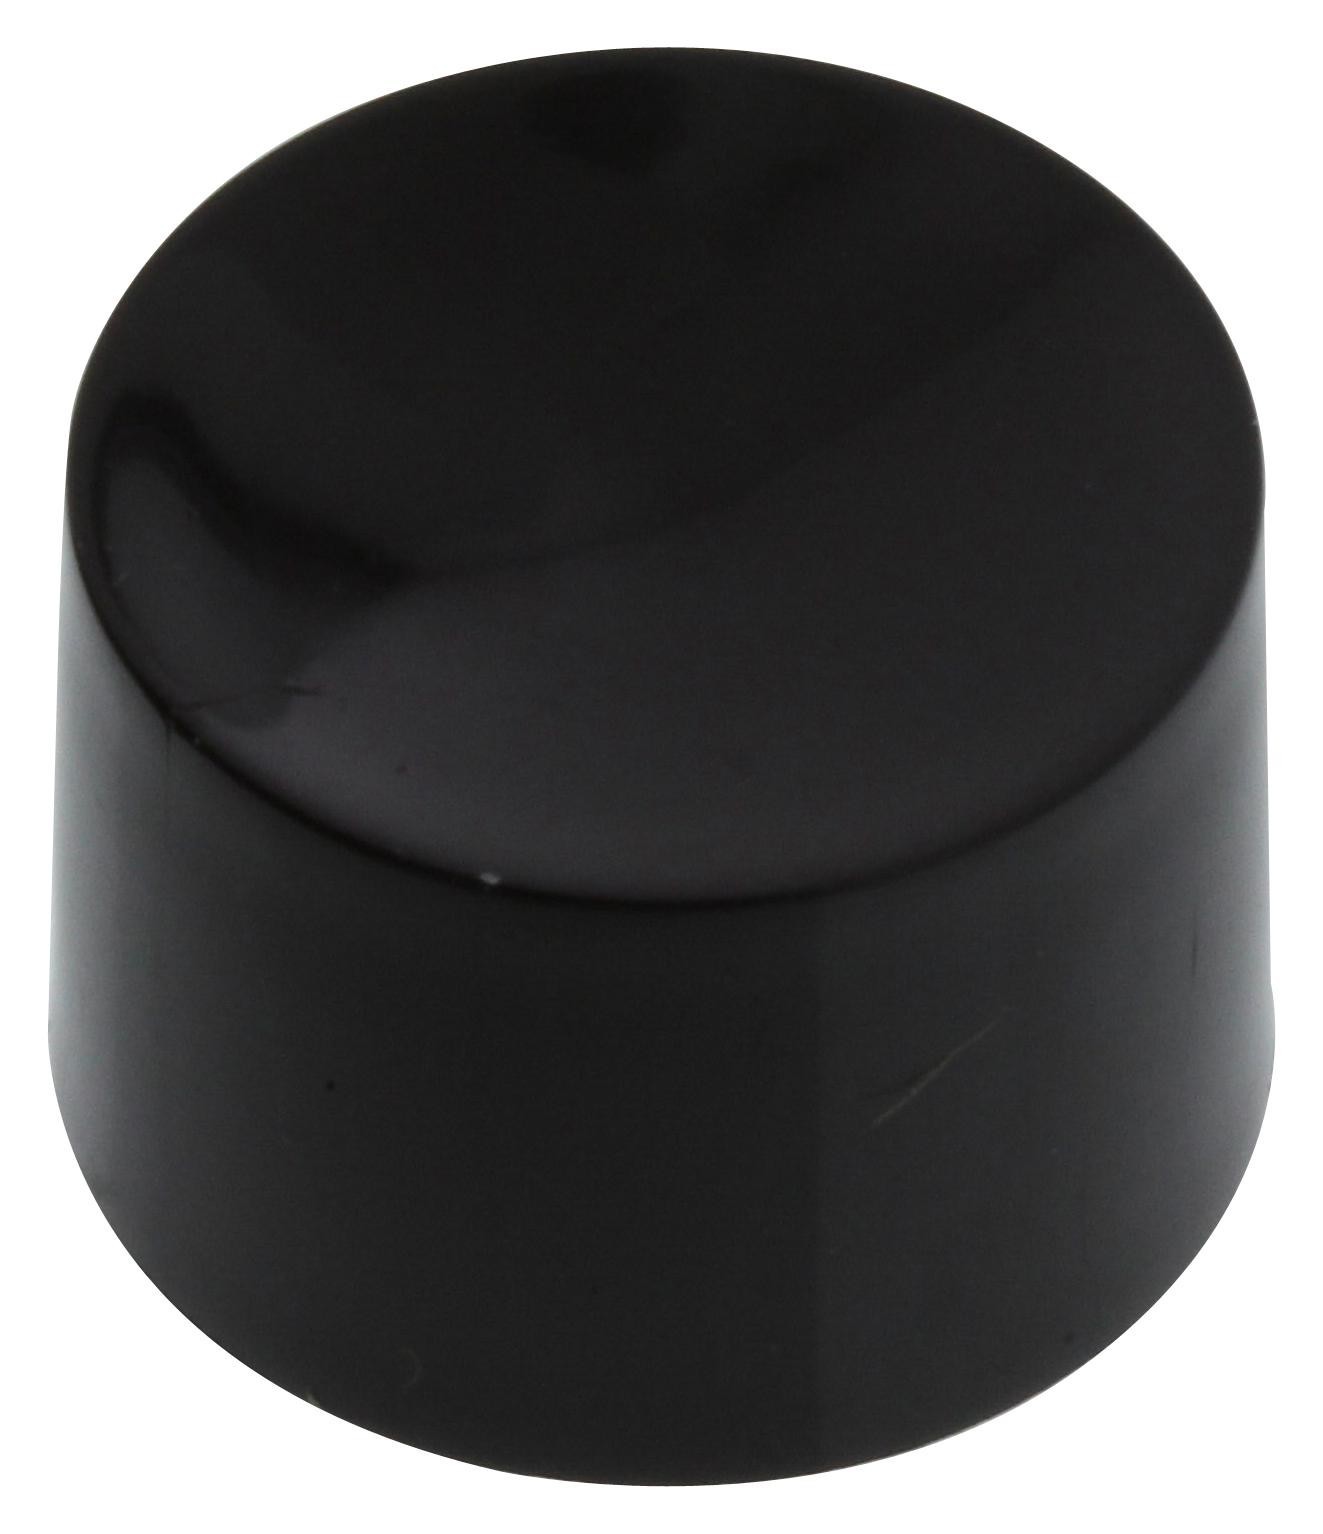 C&k Components 452D02000 Capacitor, Pushbutton Switch, Black